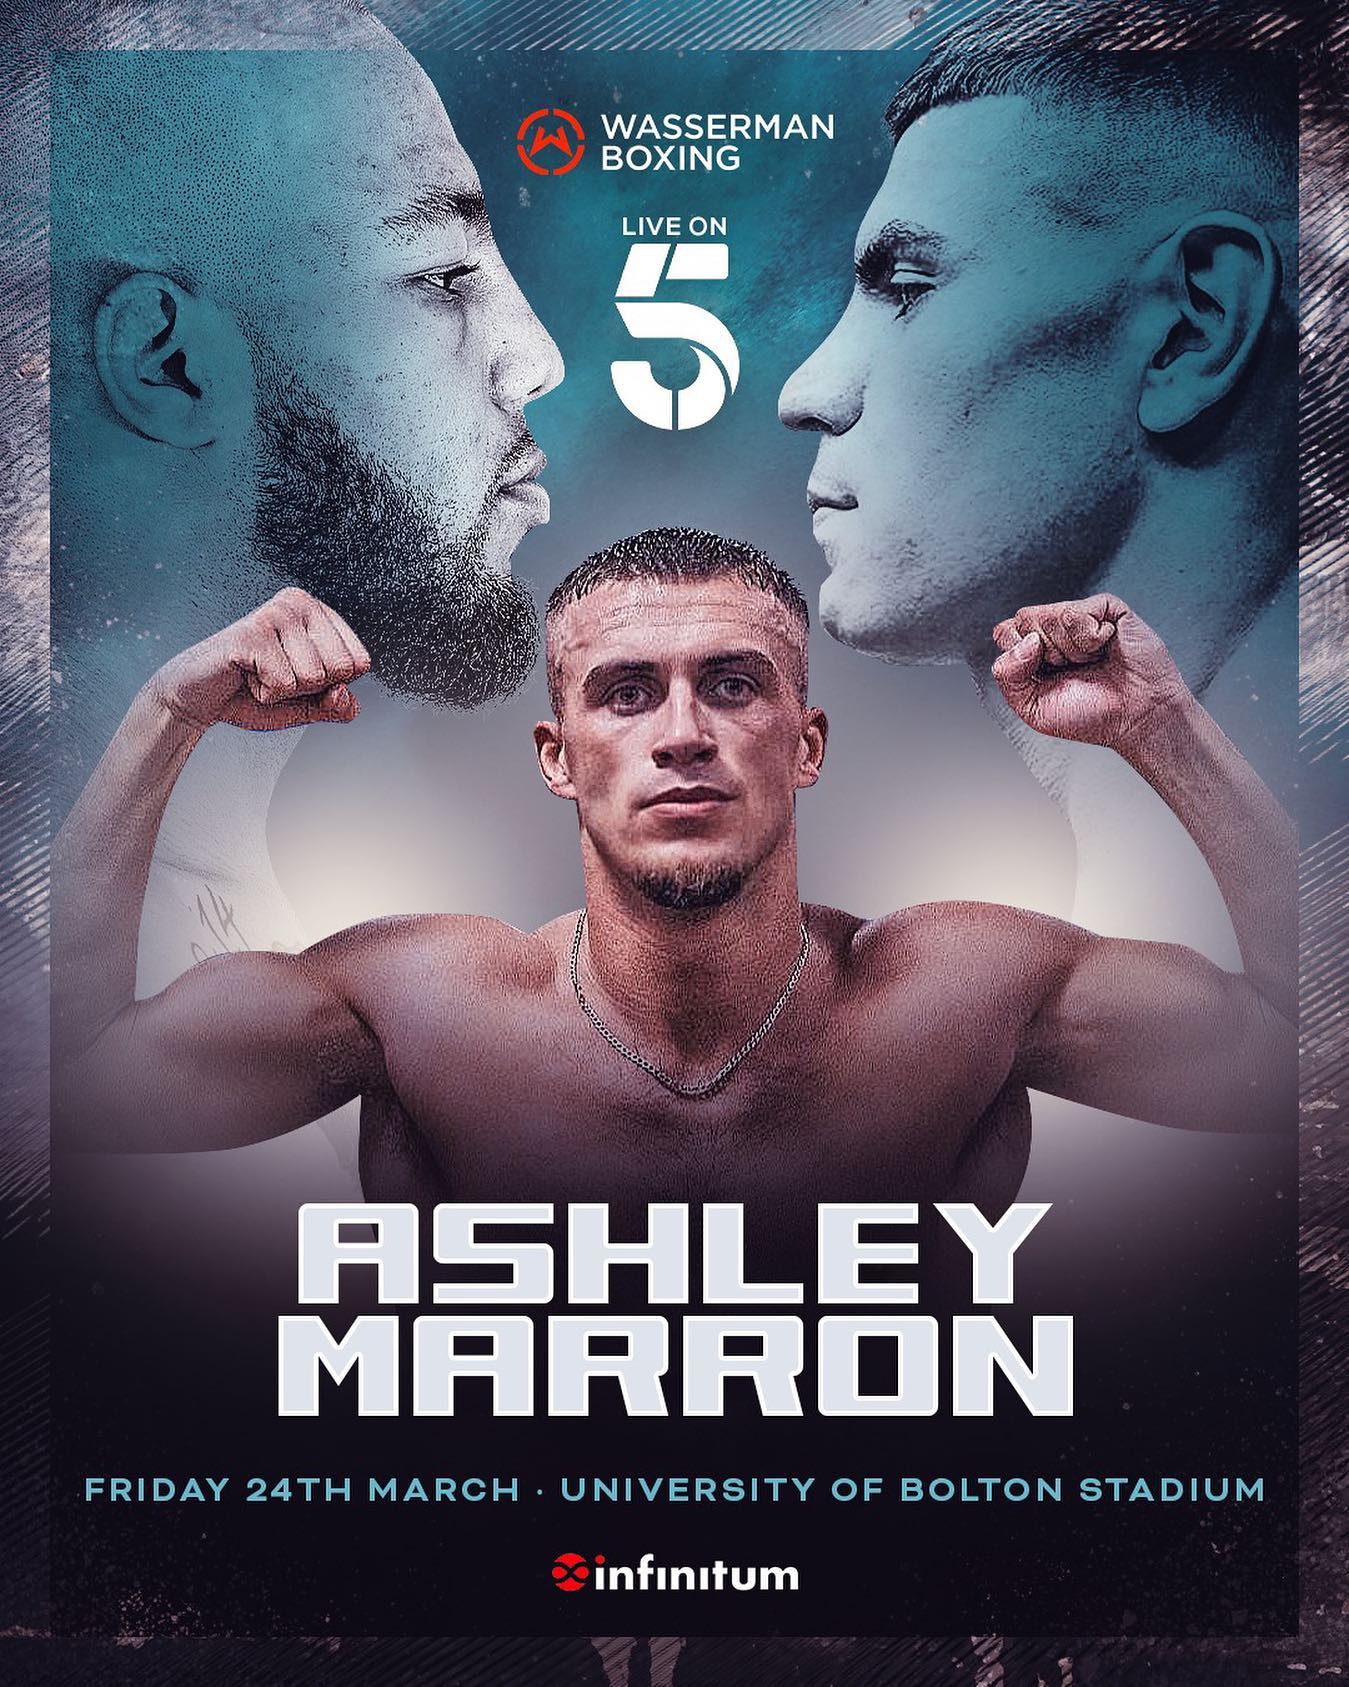 Channel 5 bring major boxing show to University of Bolton stadium The Bolton News